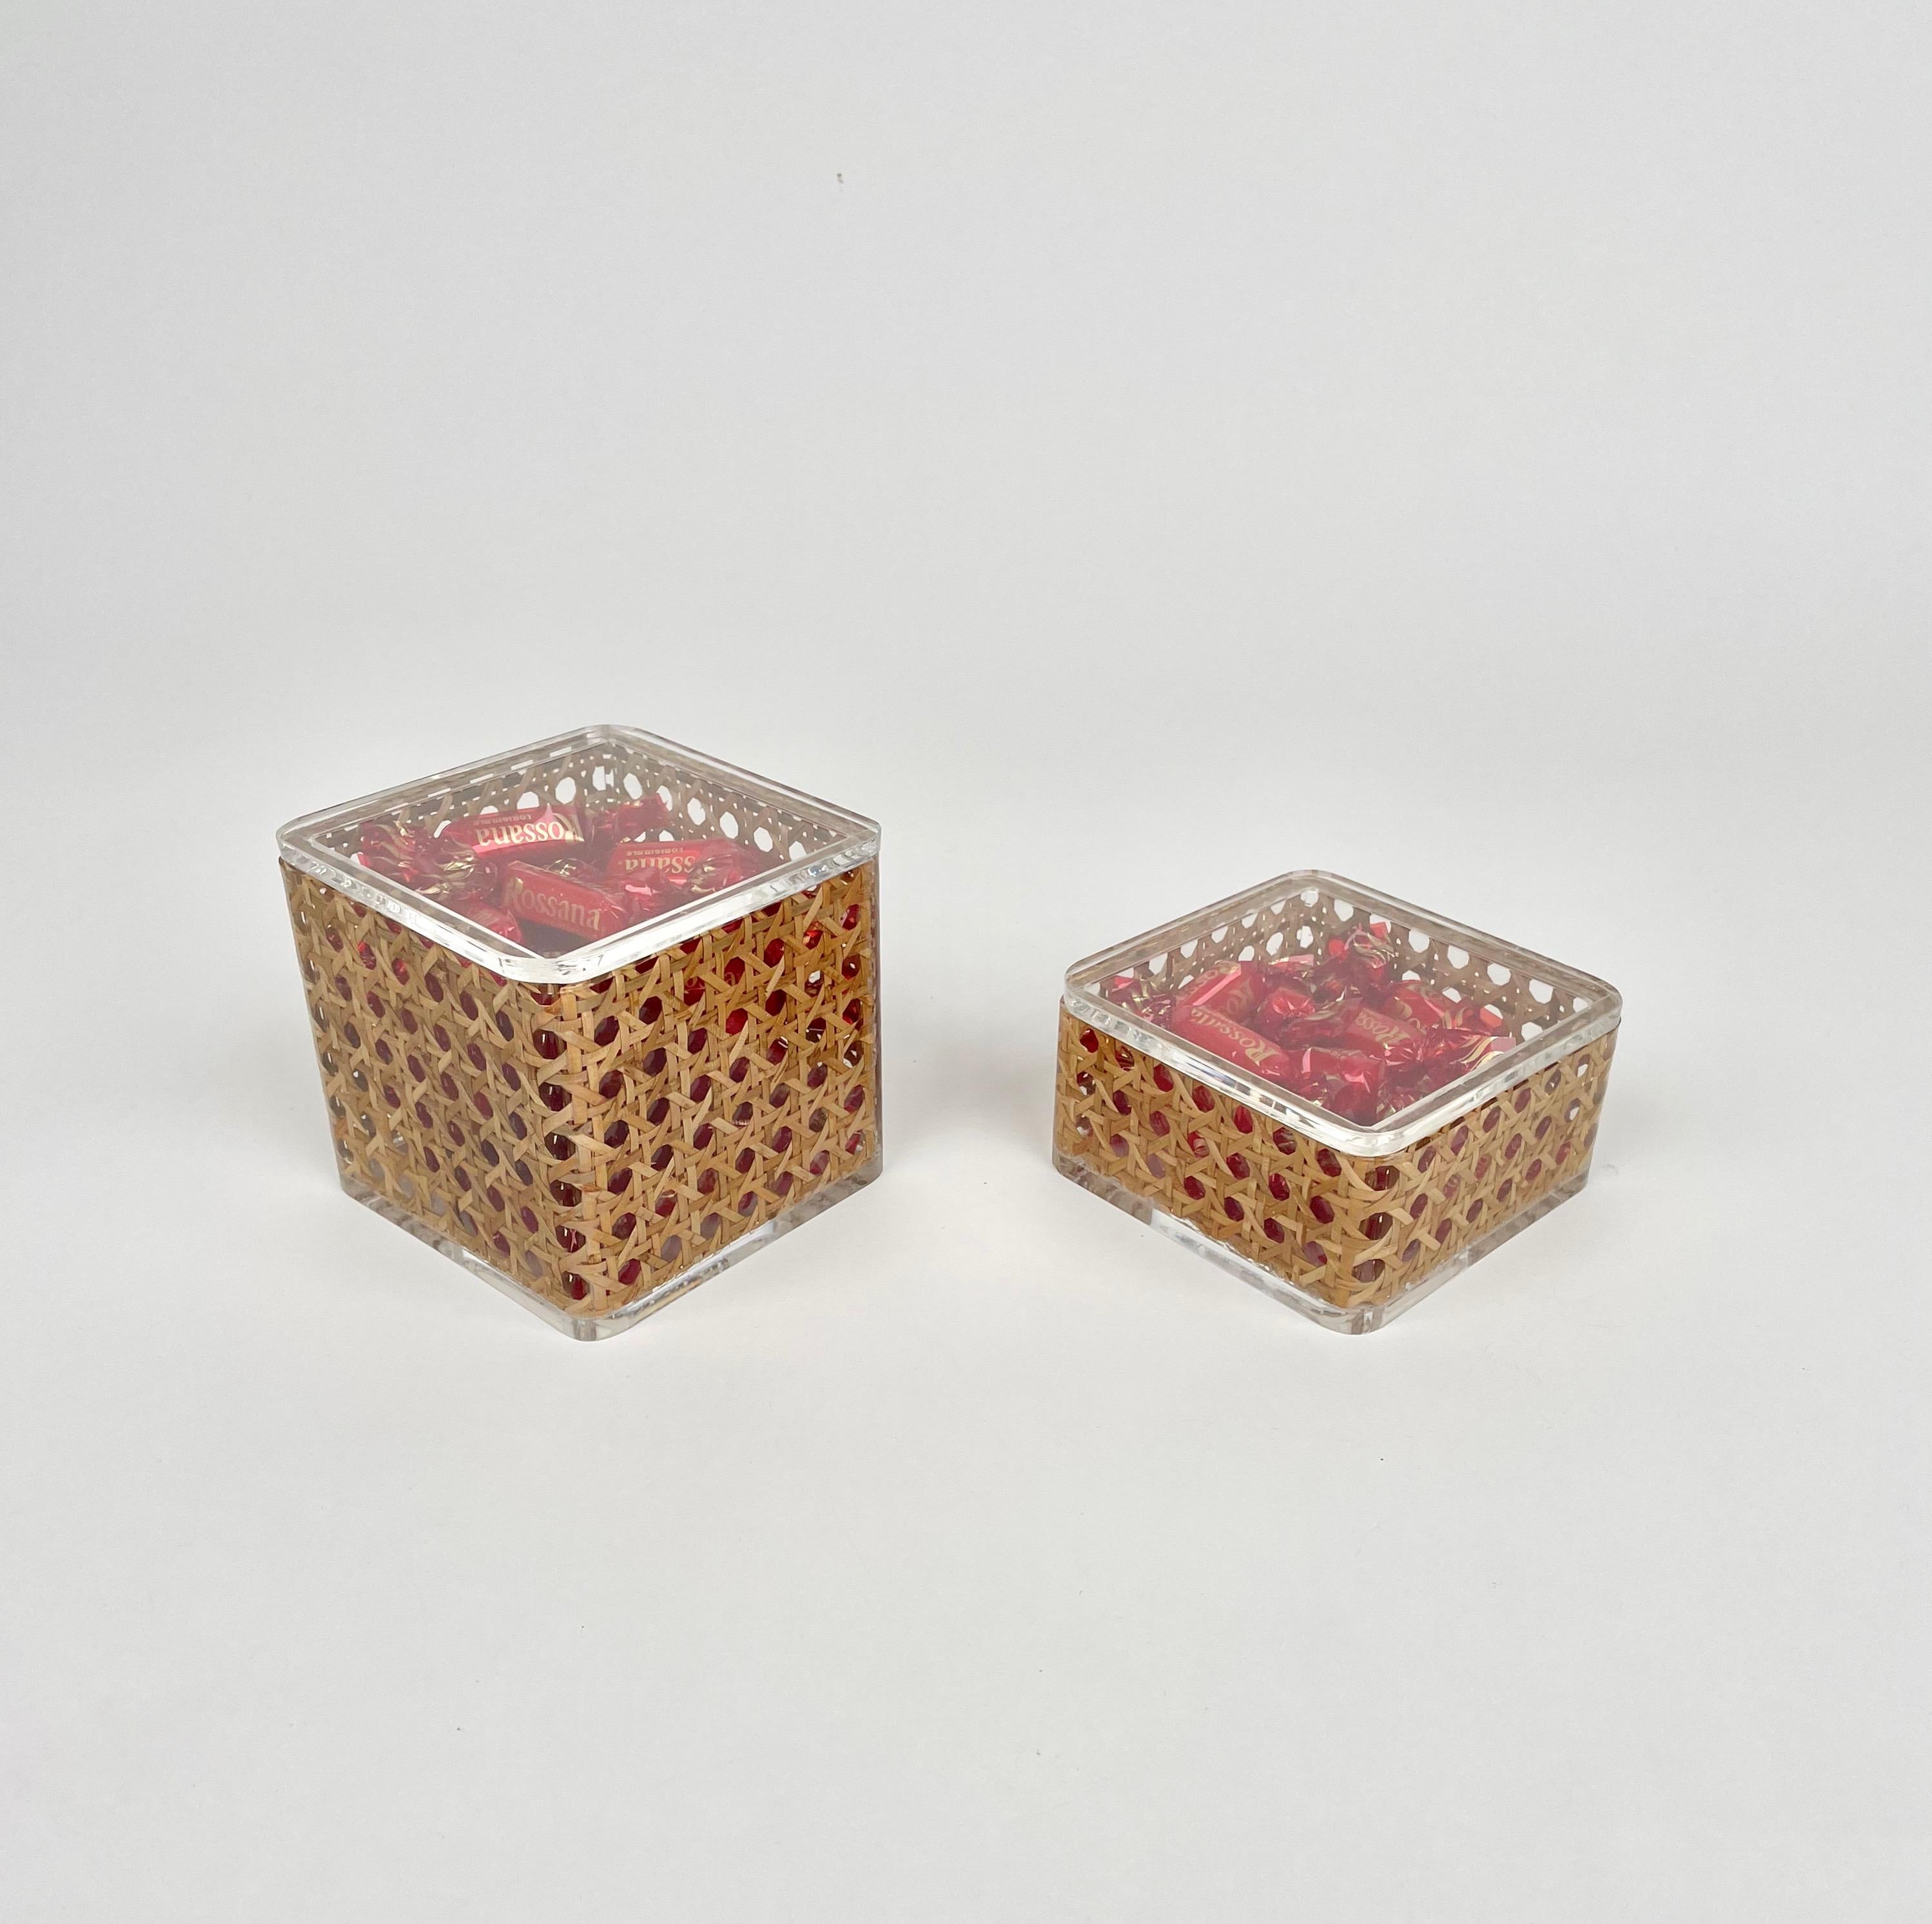 Italian Pair of Box in Lucite & Rattan Christian Dior Home Style, Italy, 1970s For Sale